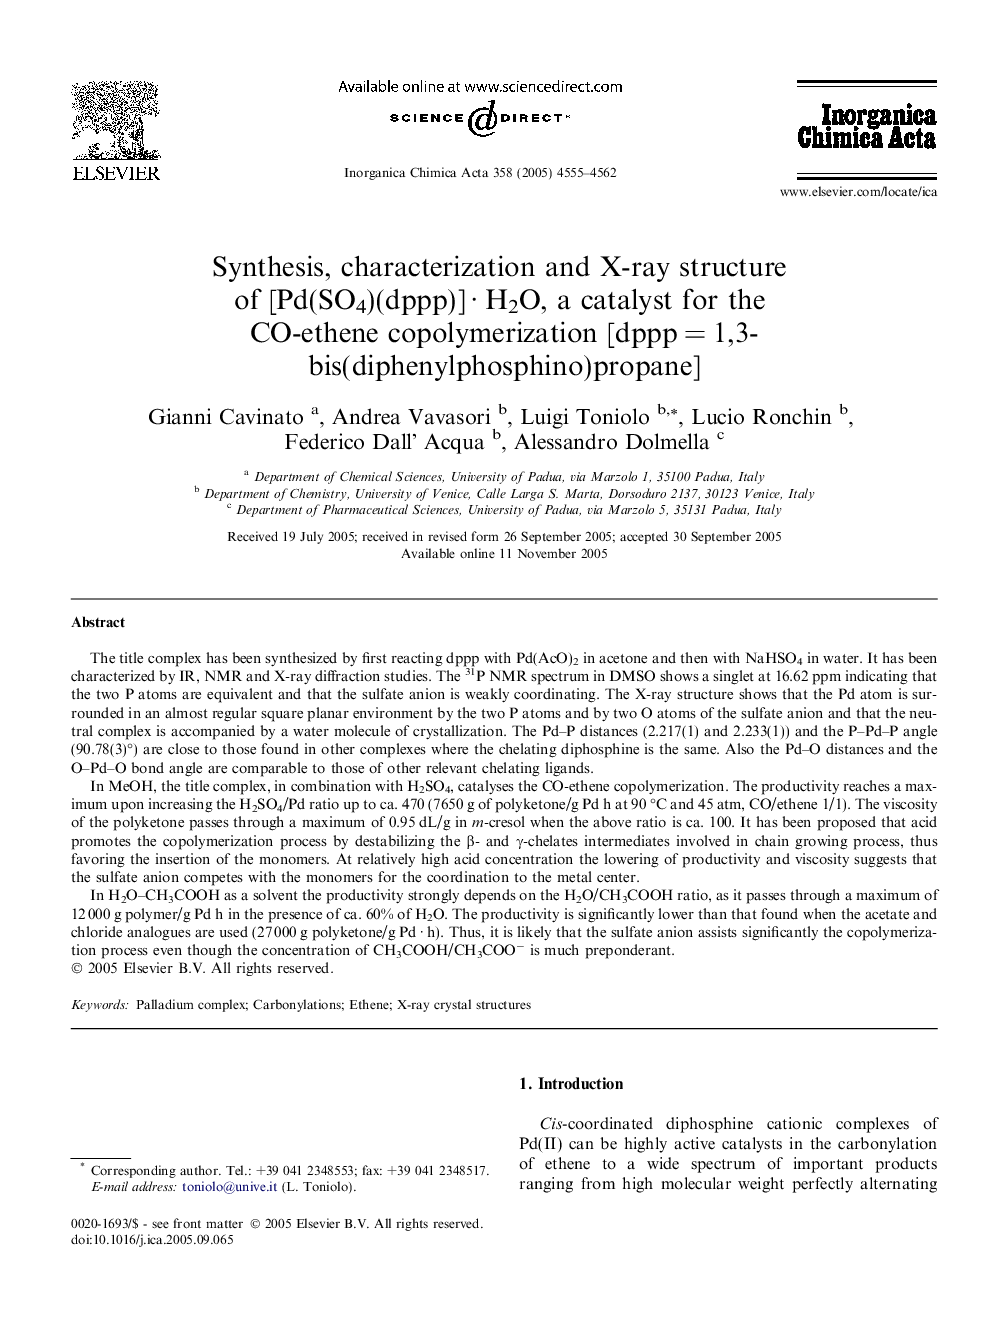 Synthesis, characterization and X-ray structure of [Pd(SO4)(dppp)] · H2O, a catalyst for the CO-ethene copolymerization [dppp = 1,3-bis(diphenylphosphino)propane]